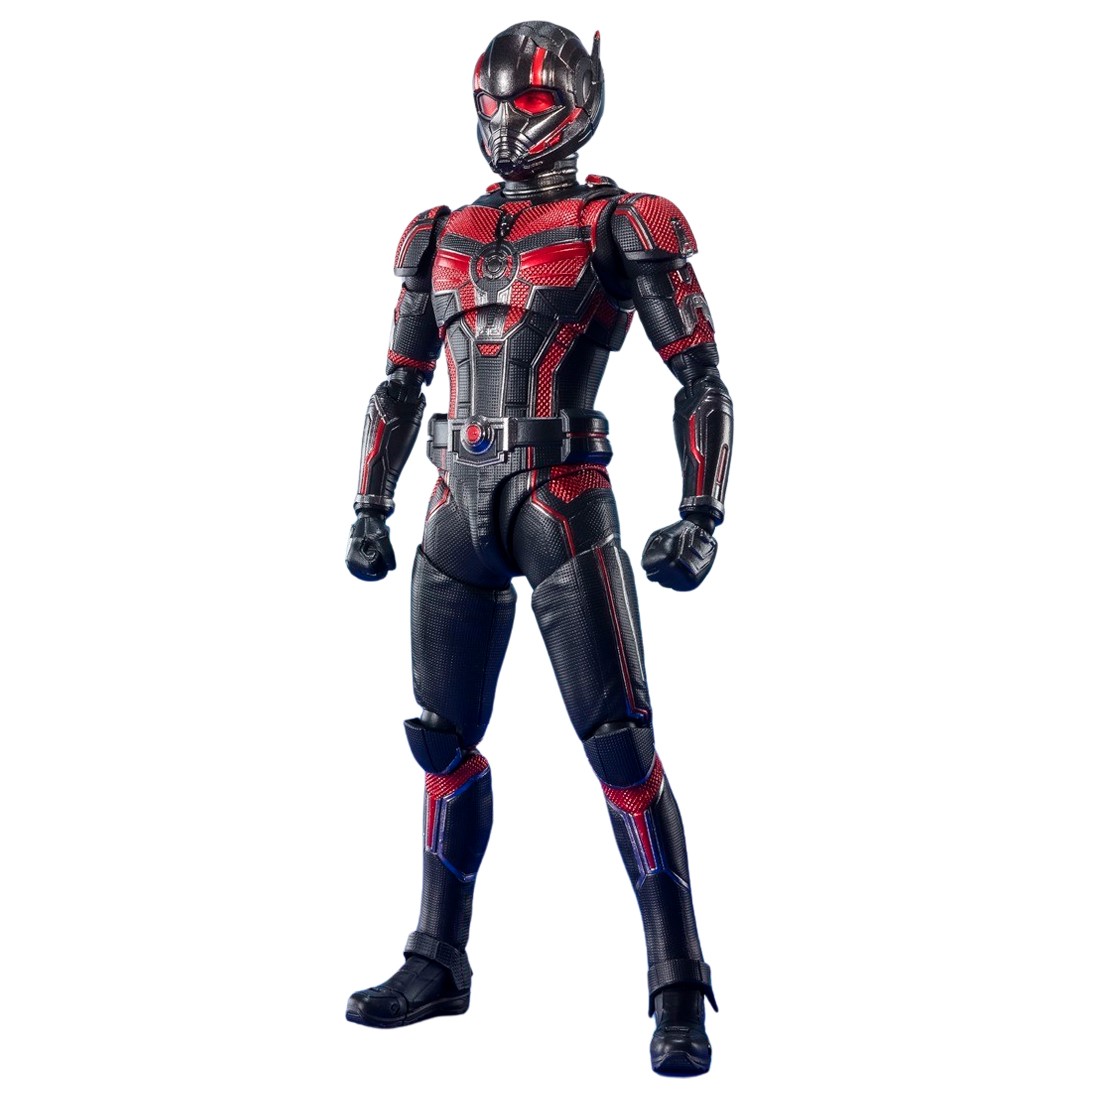 Bandai S.H.Figuarts Ant-Man And The Wasp - Ant-Man Figure (red)